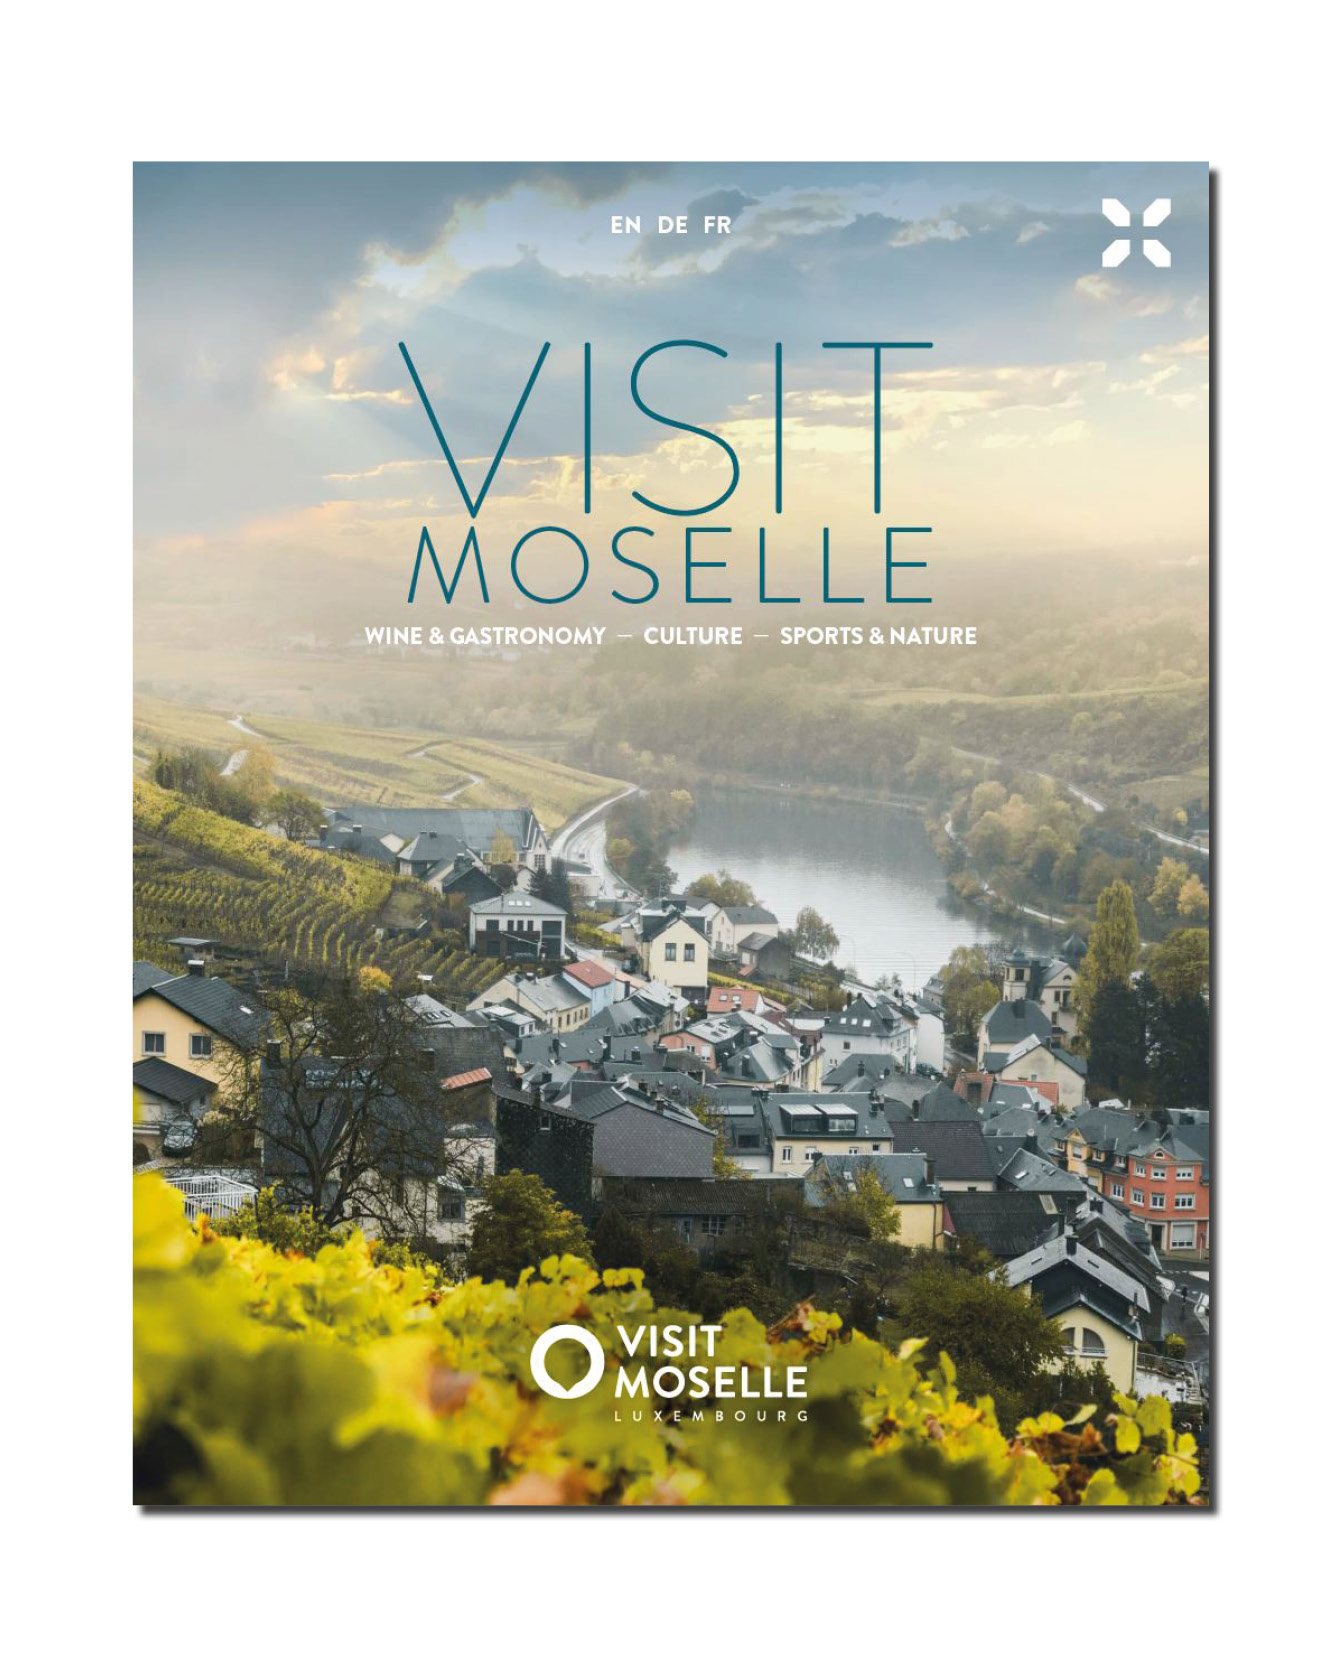 Visit Moselle